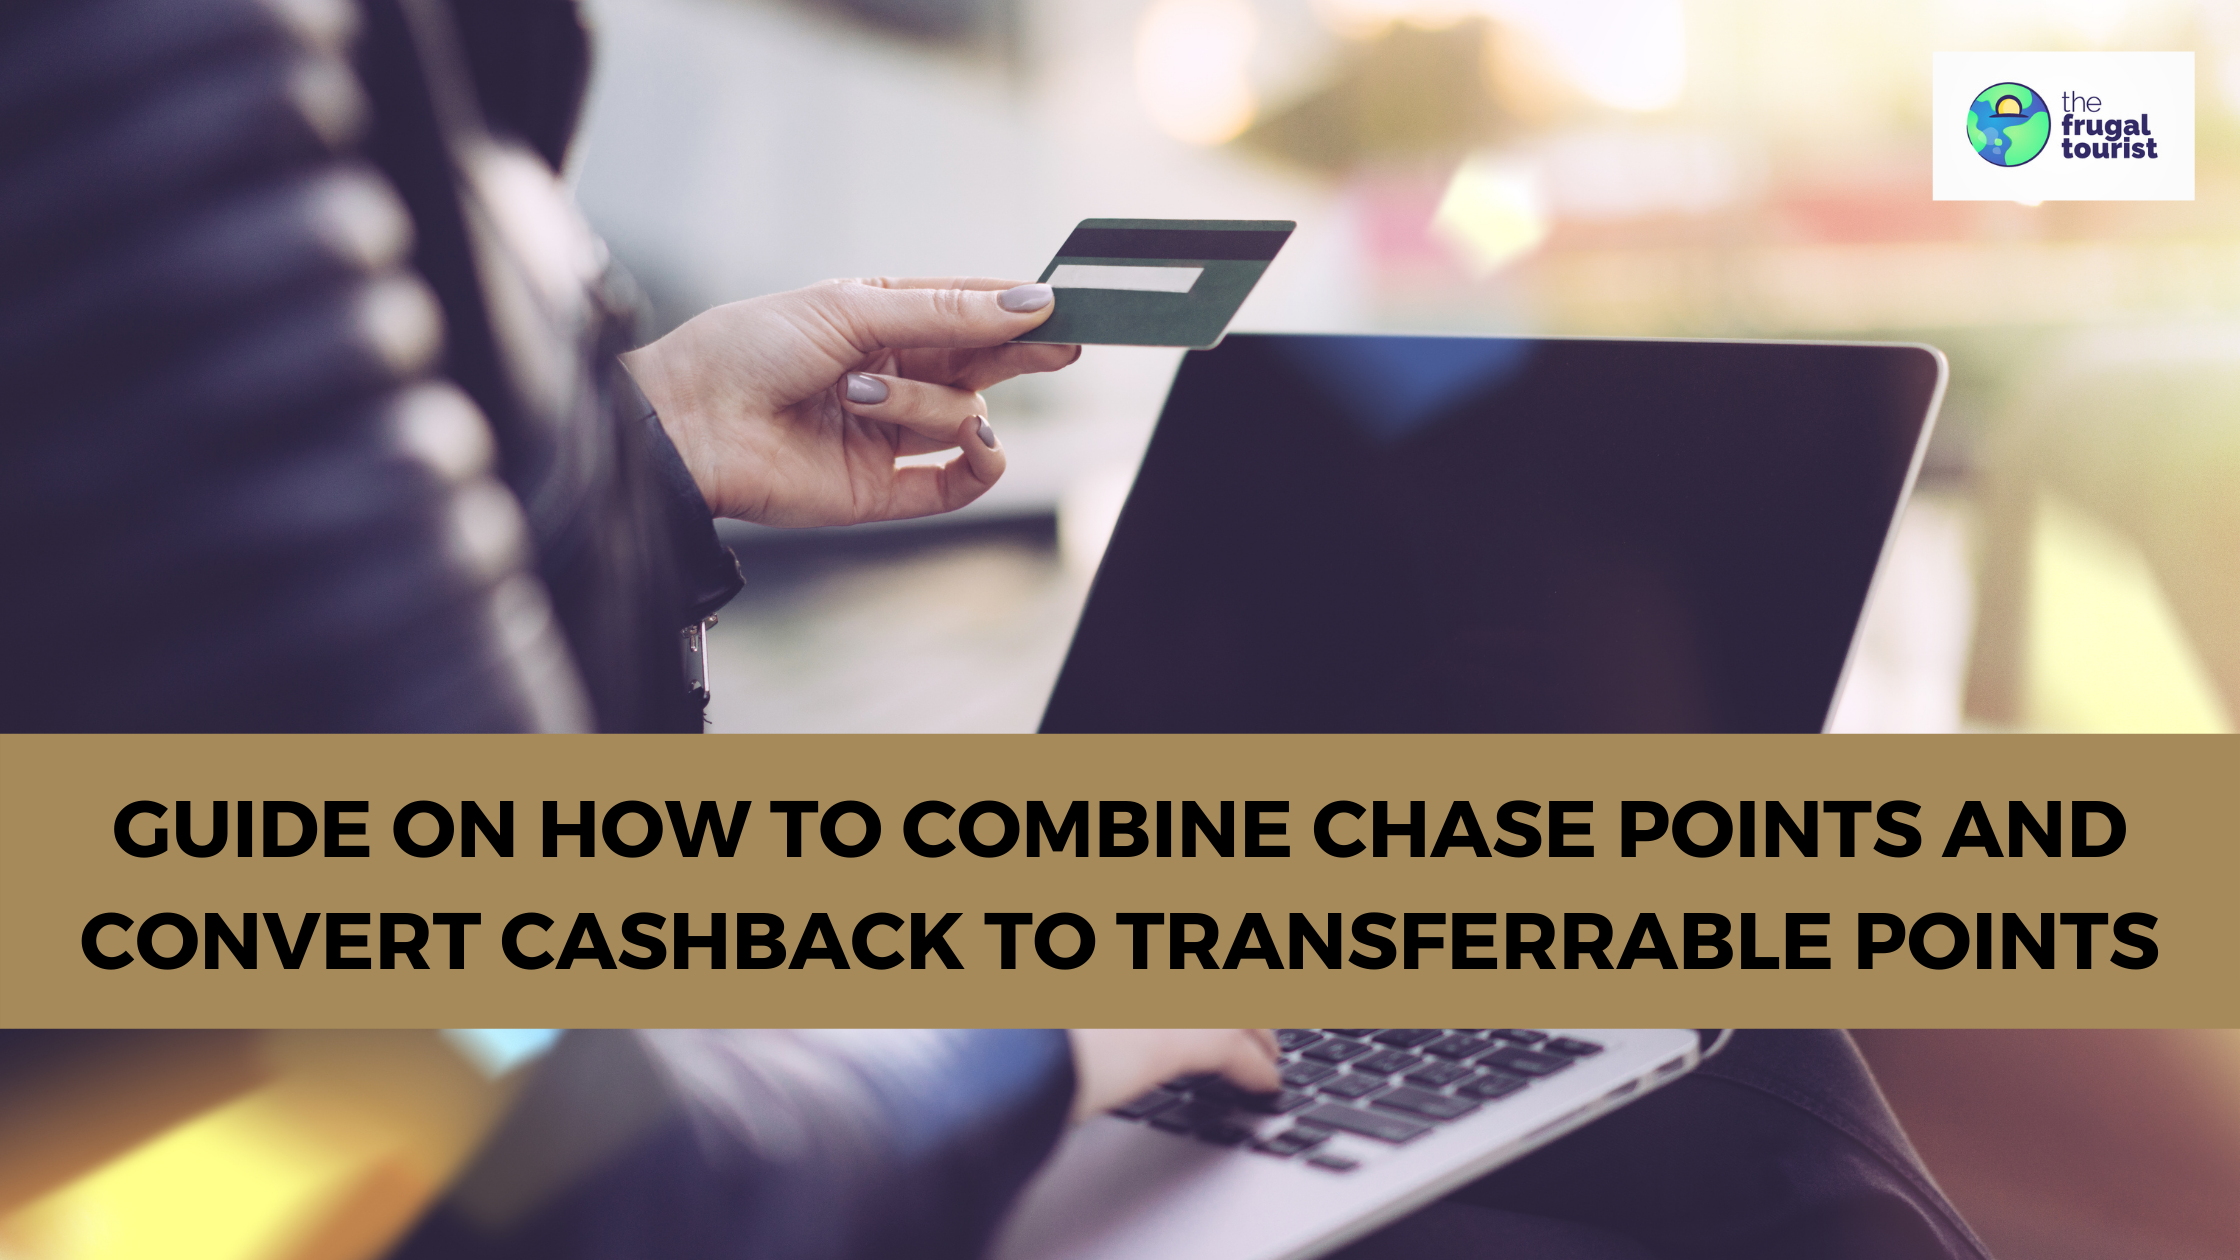 Guide On How To Convert Chase Cashback to Ultimate Rewards “Travel” Points